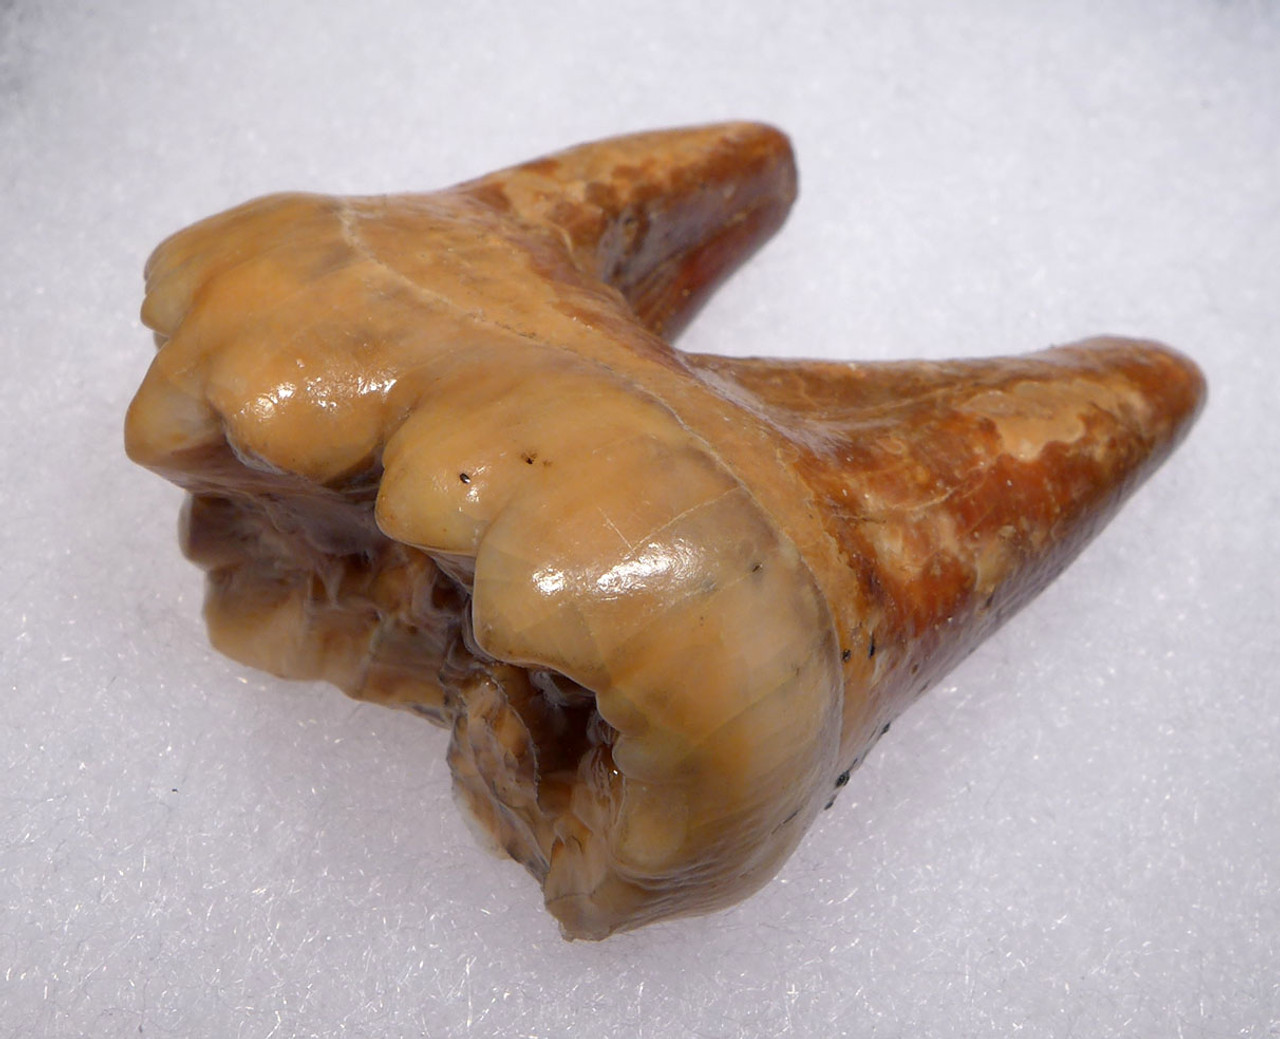 SUPREME LARGE AUSTRIAN CAVE BEAR FOSSIL MOLAR TOOTH WITH ROOT FROM THE FAMOUS DRACHENHOHLE DRAGONS CAVE *LM40-193